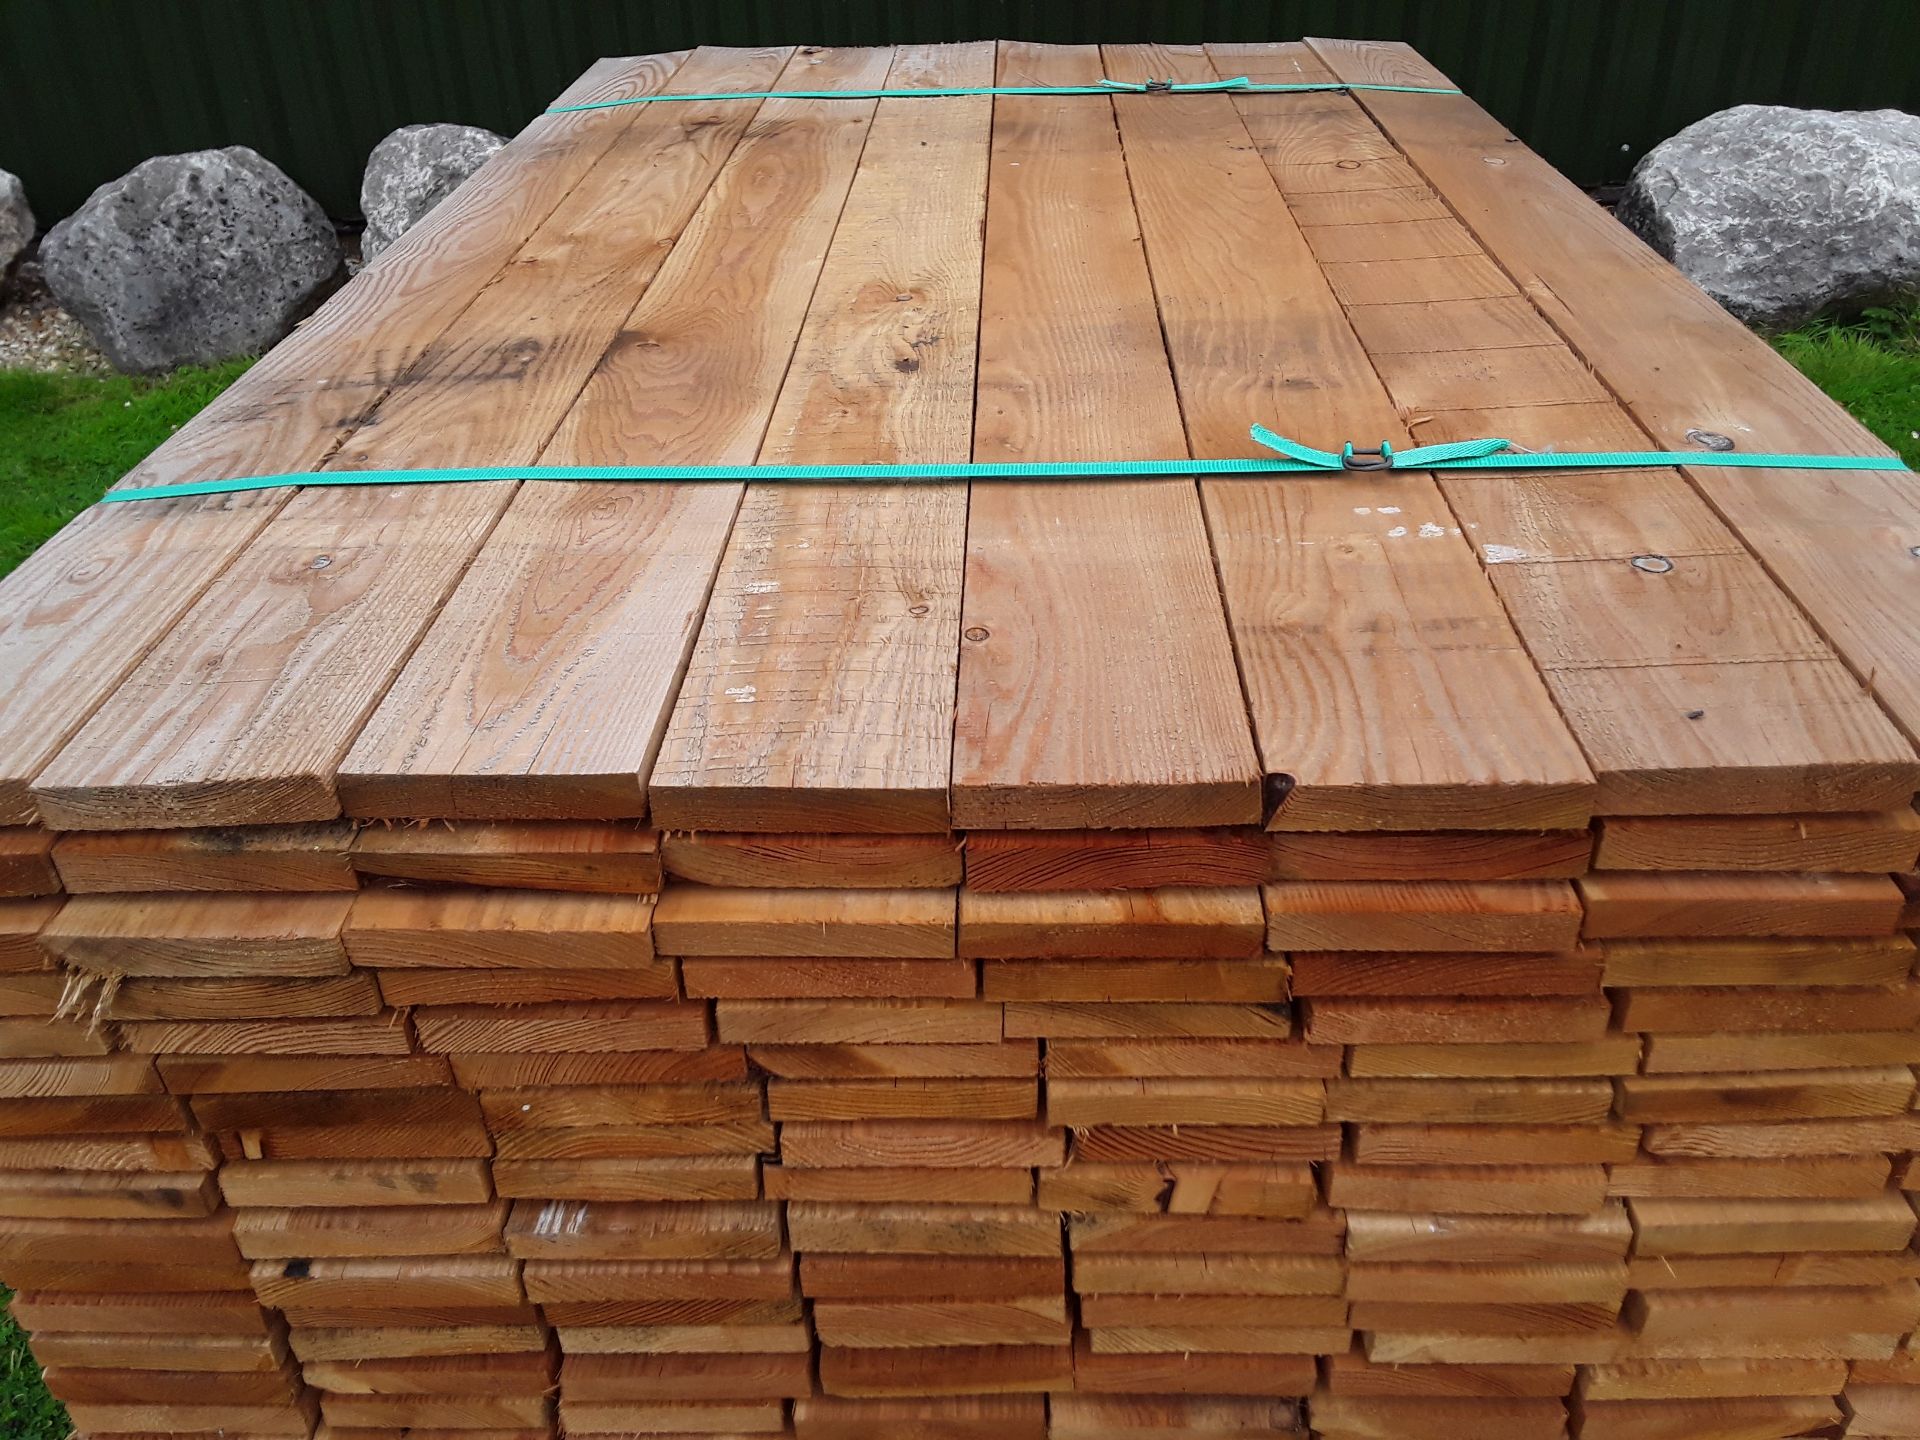 50x Softwood Fresh Sawn Mixed Larch / Douglas Fir Boards / Planks / Cladding 1" x 6" x 6FT - Image 2 of 4